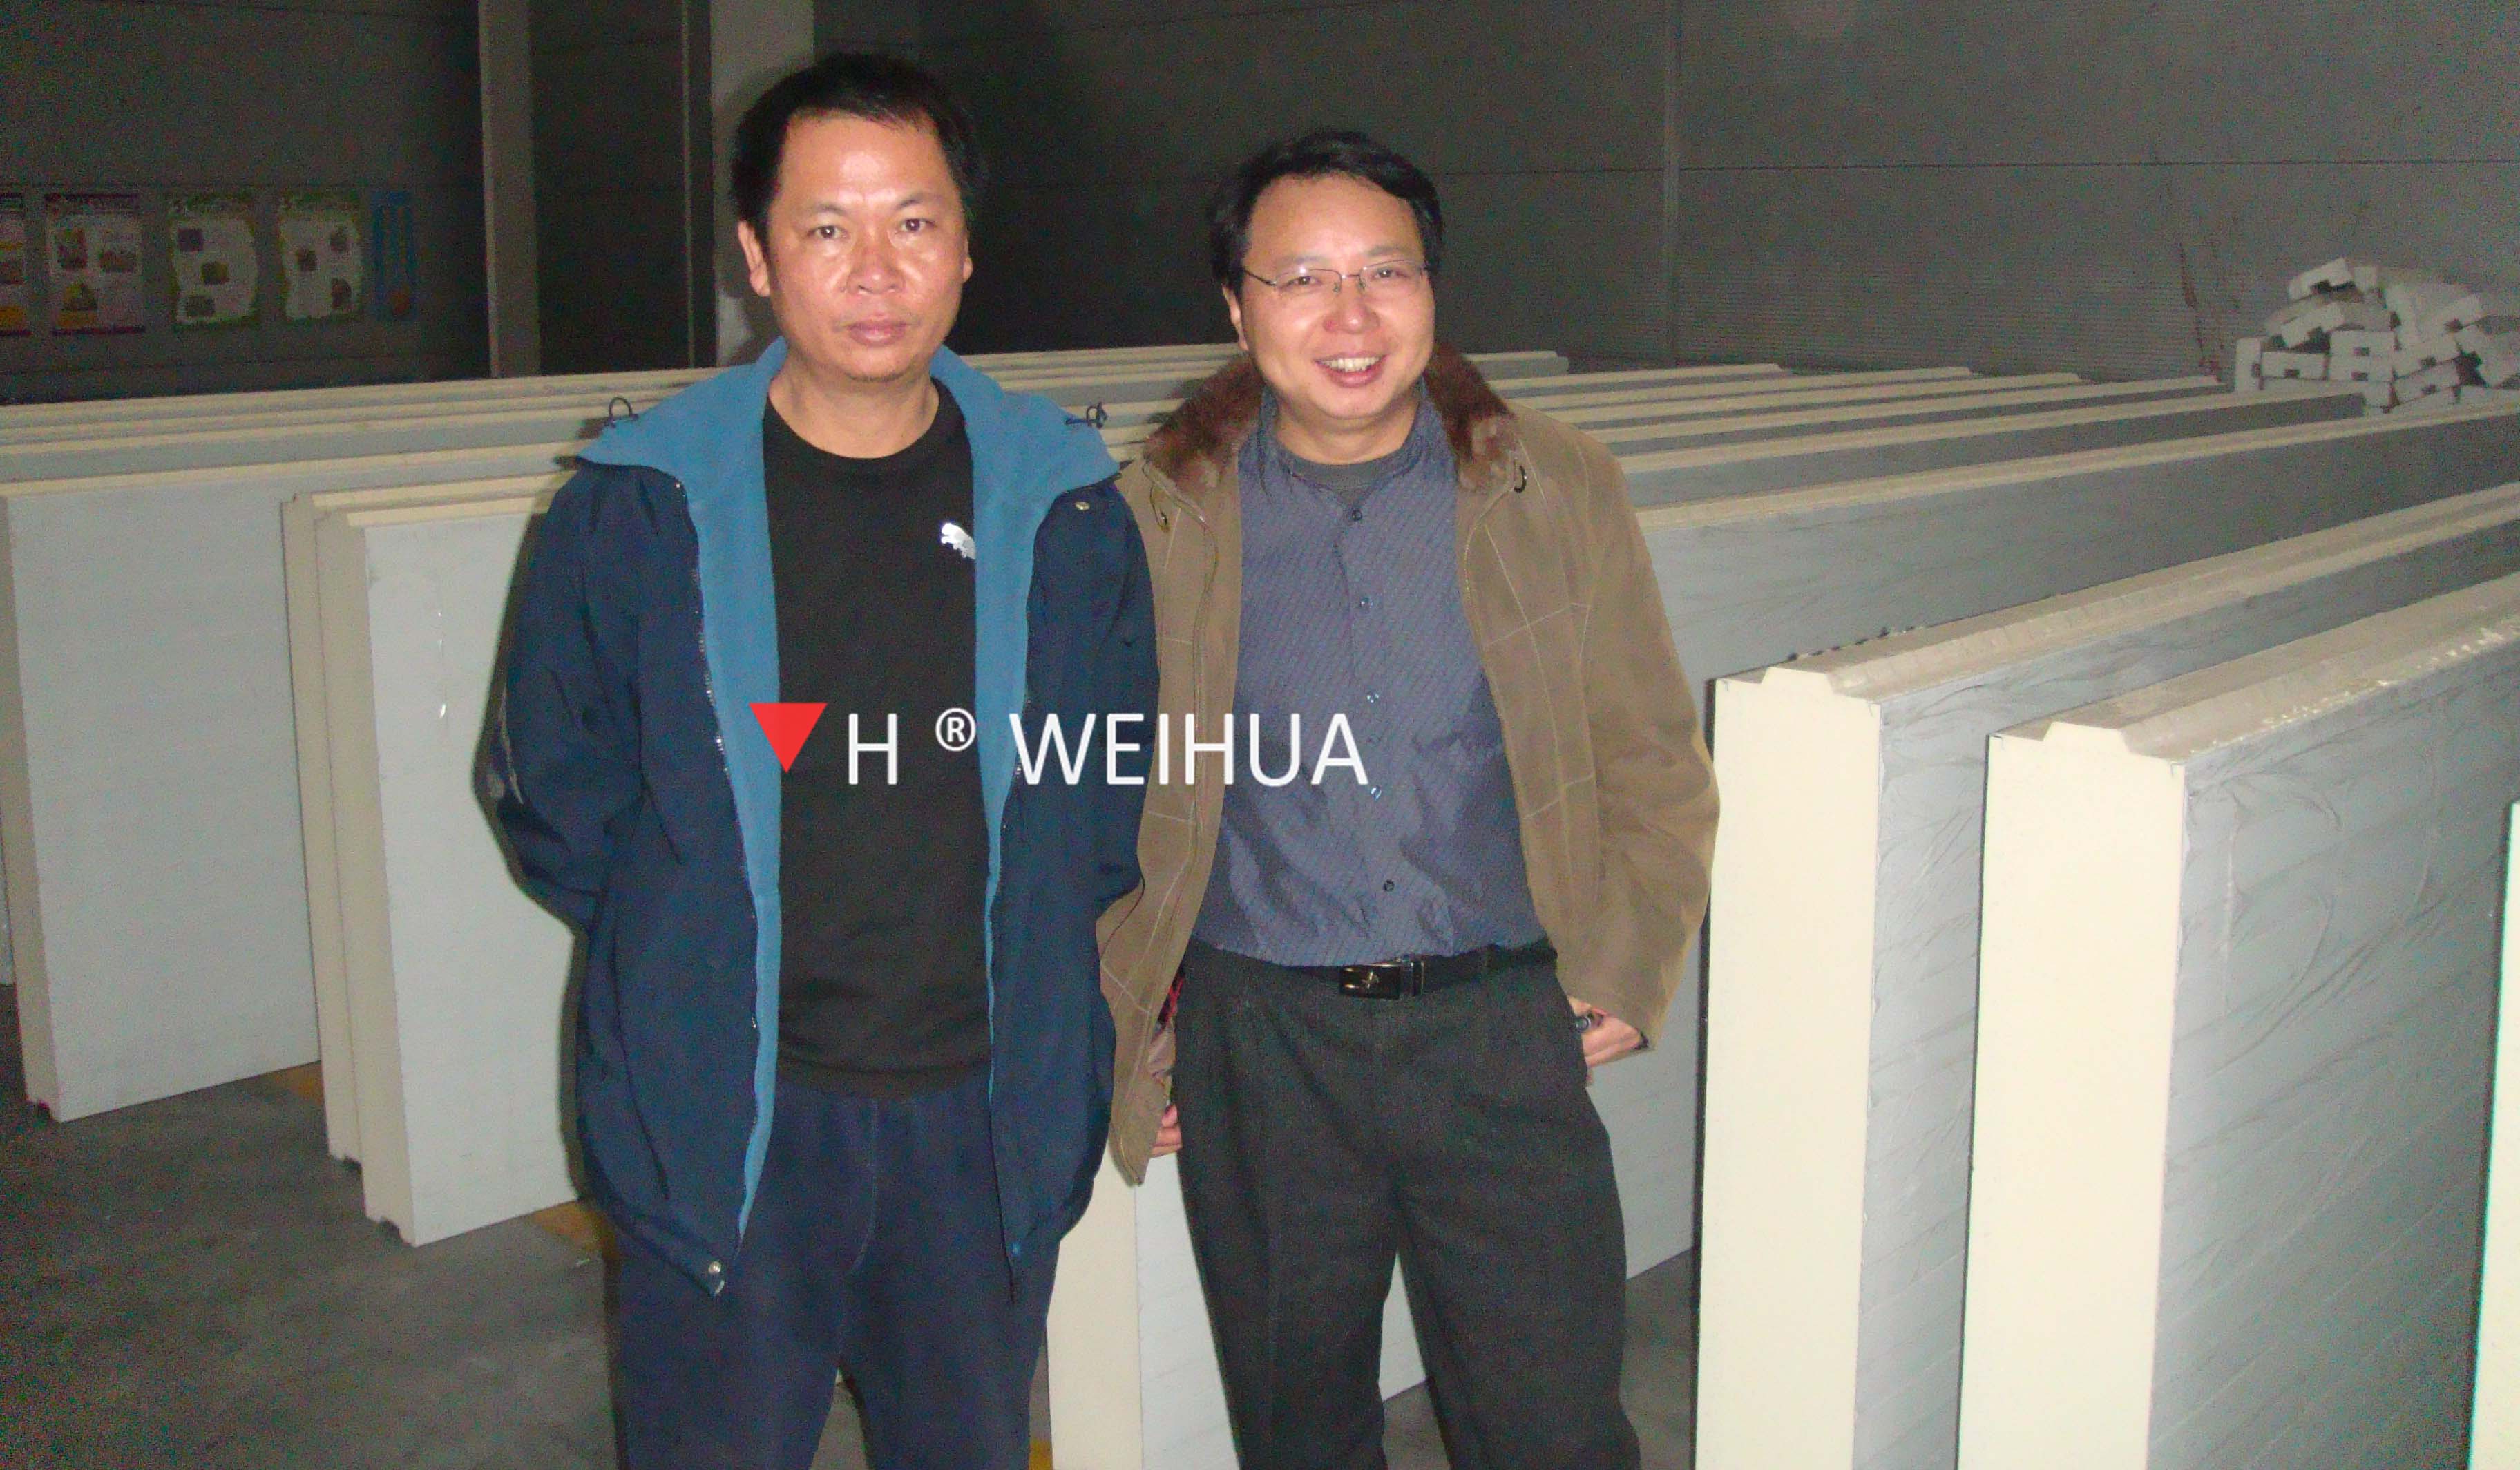 General manager of Weihua and our customer